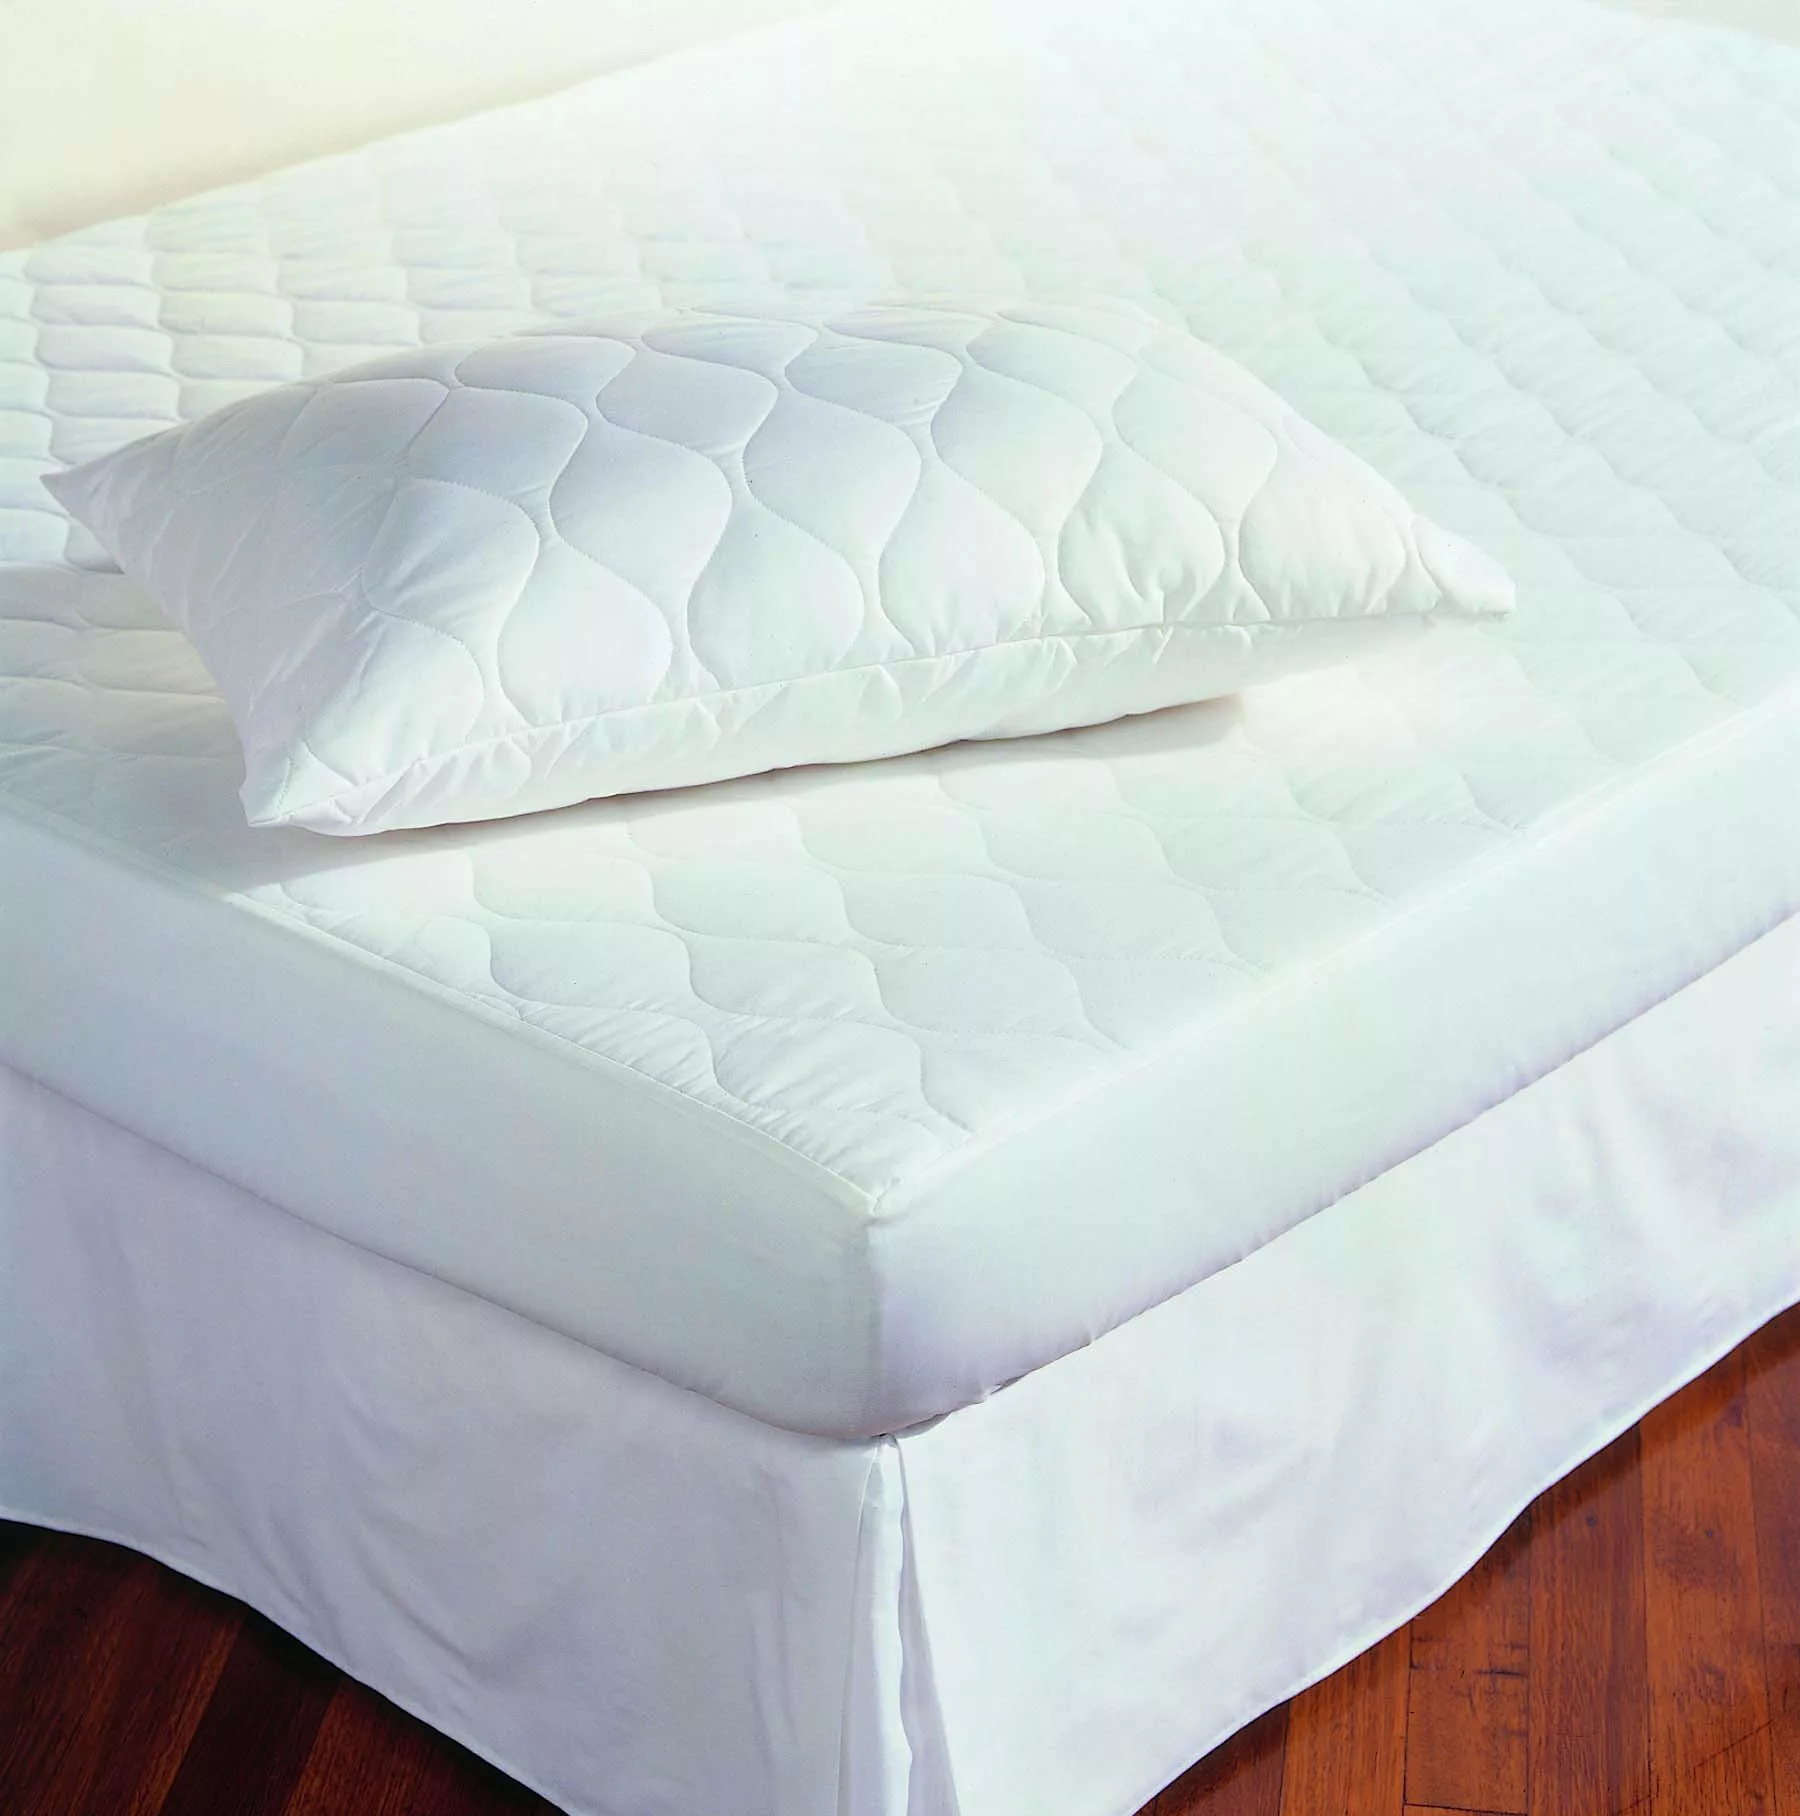 mattress and pillow protectors on a bed